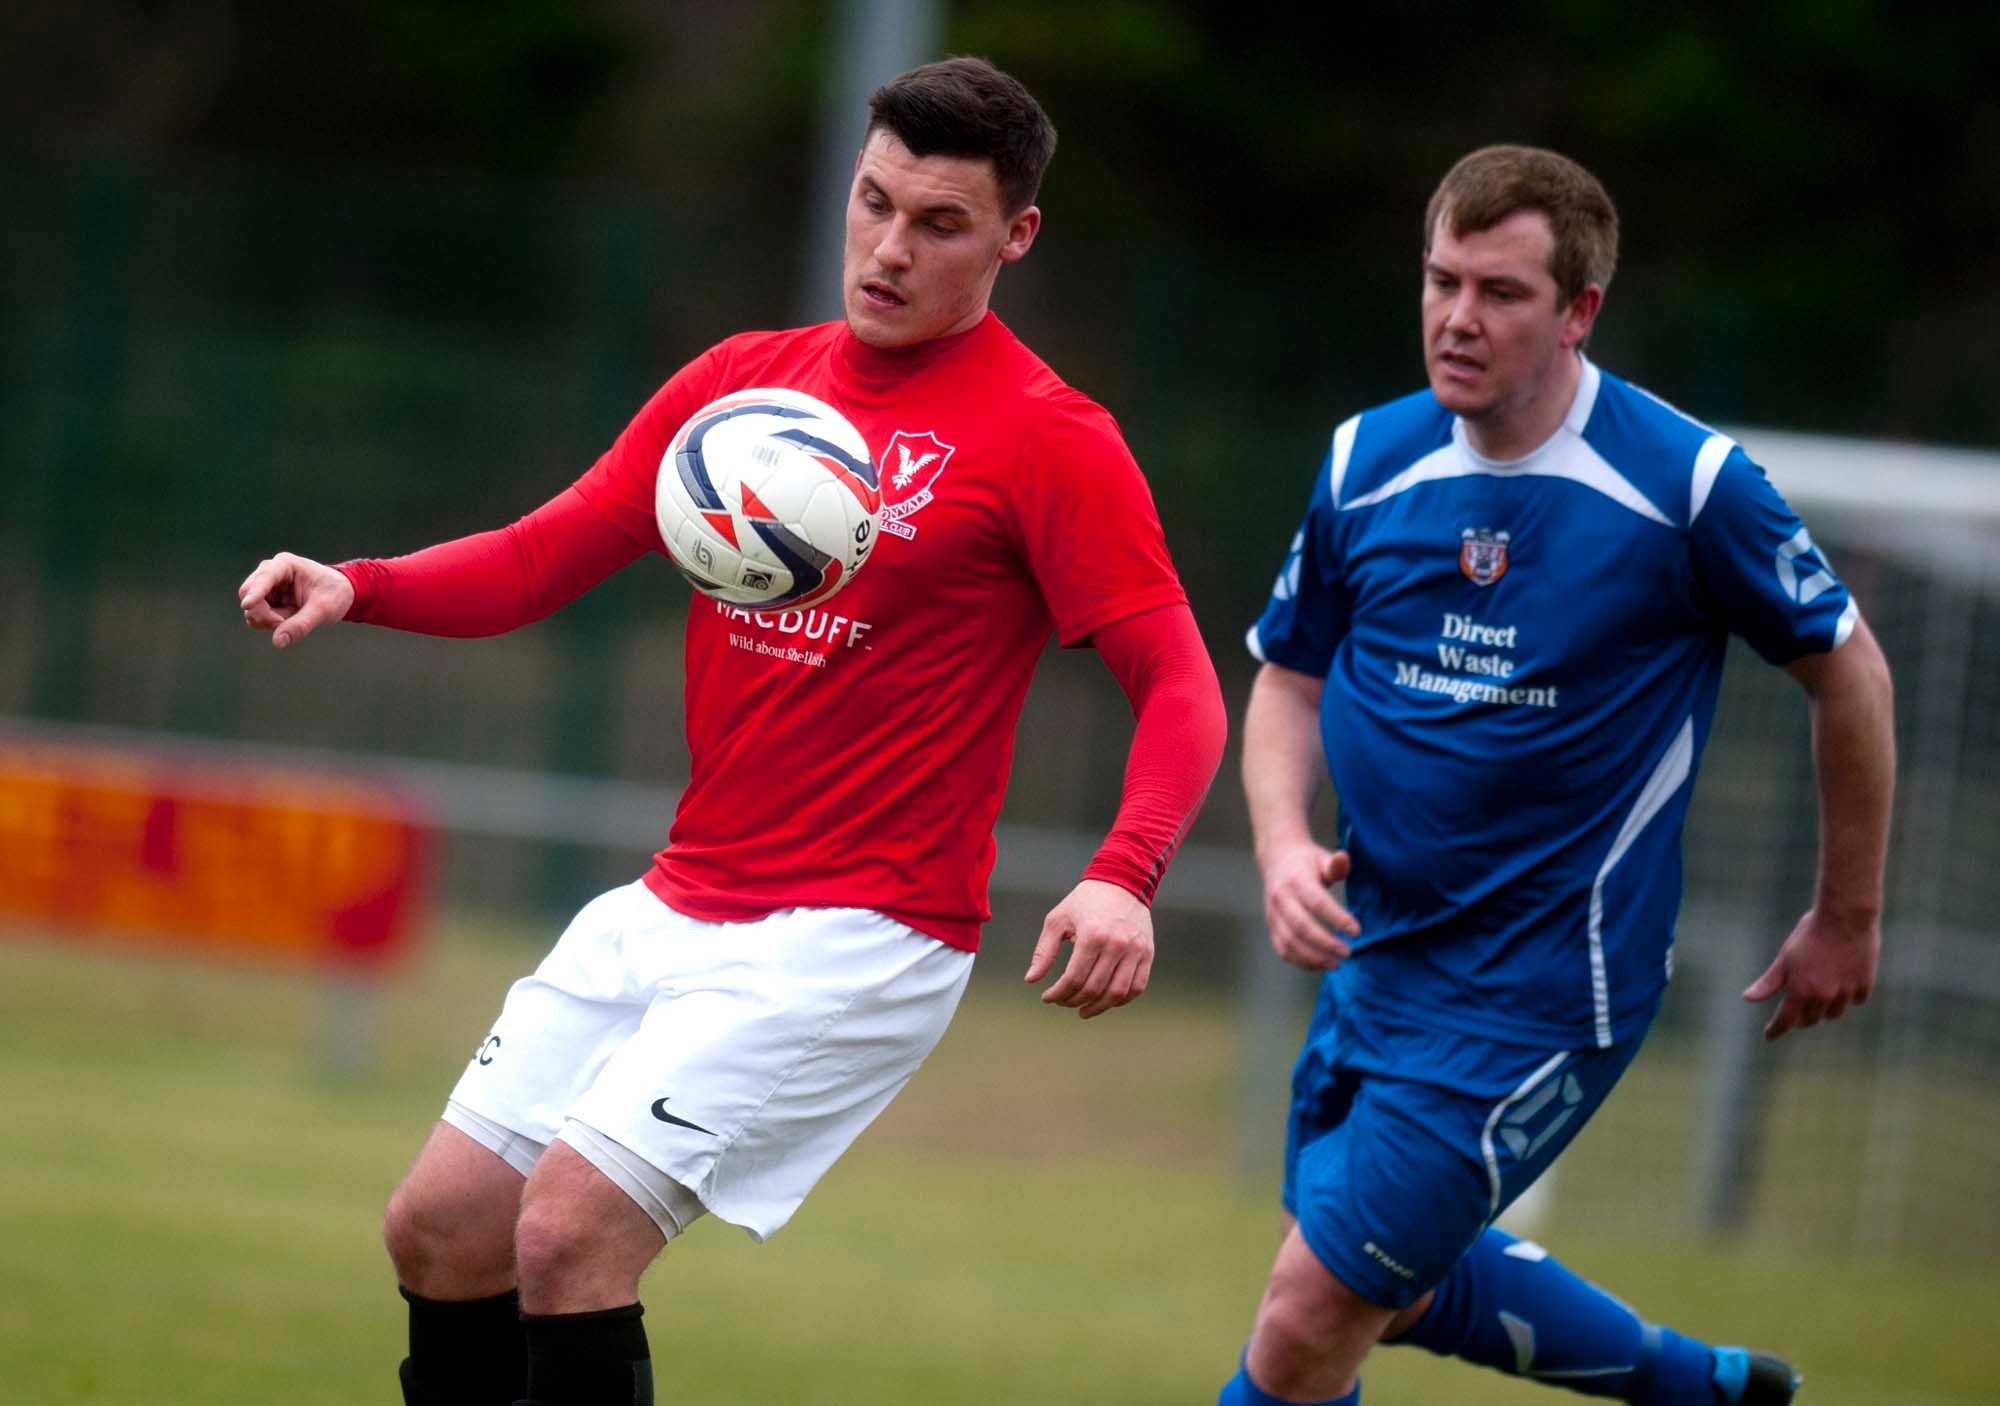 Deveronvale ran out 3-1 winners against Rothes